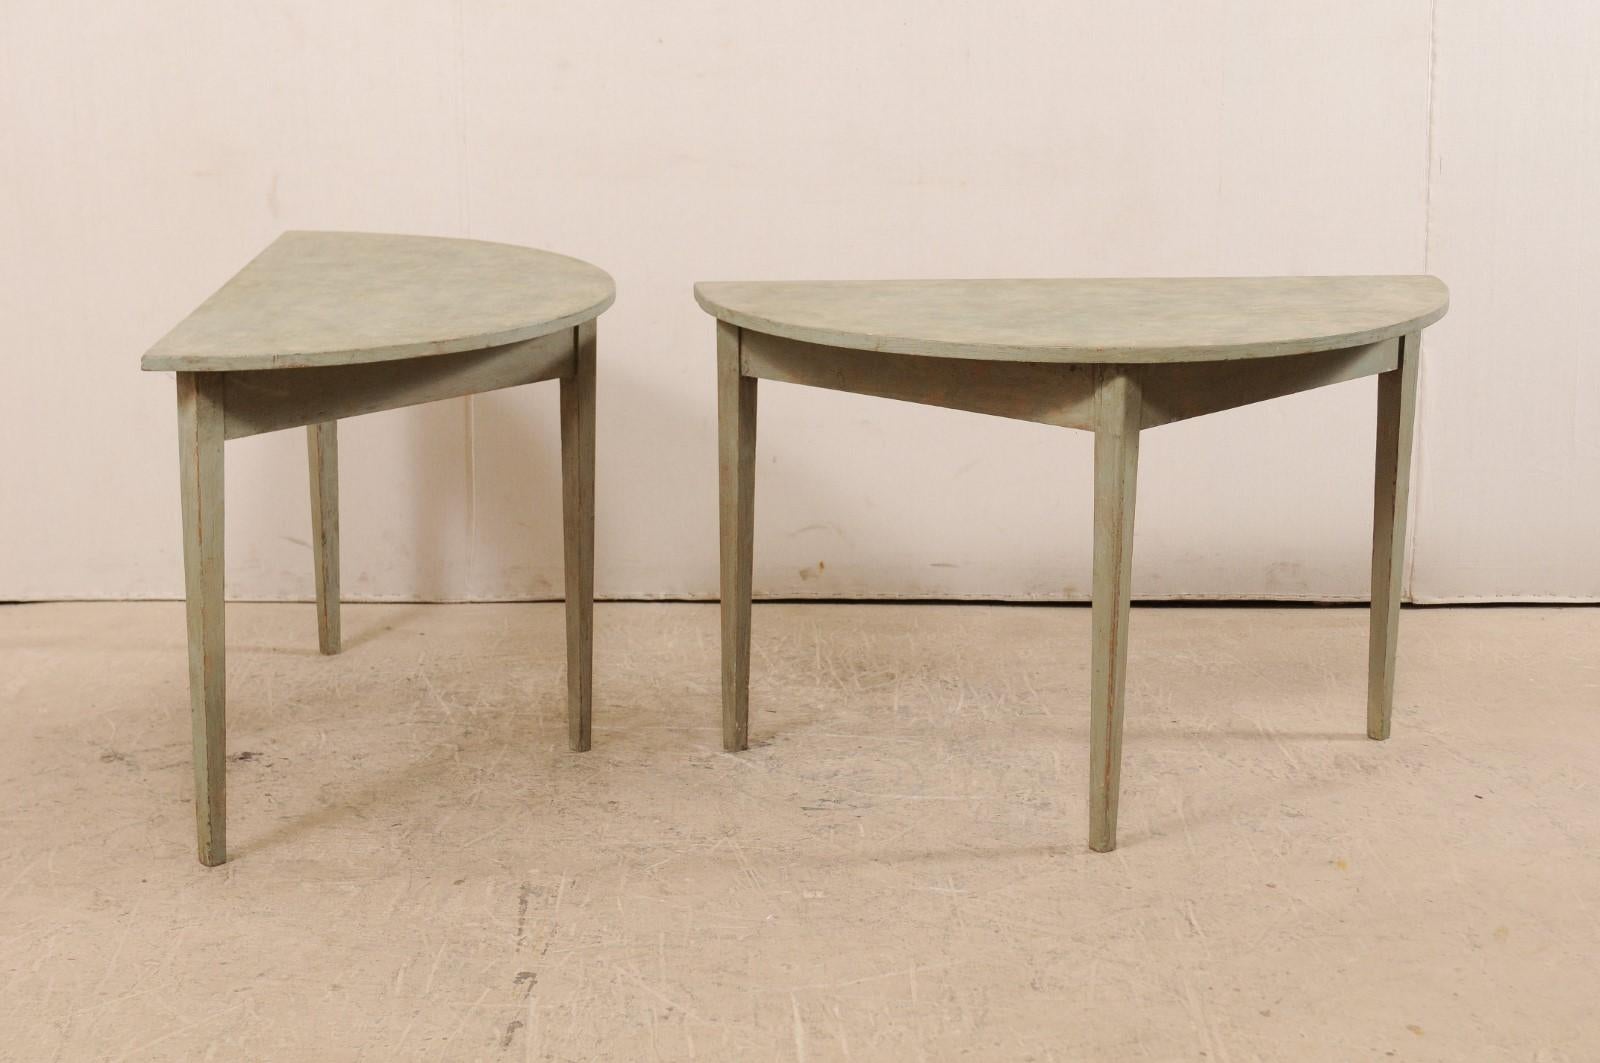 A pair of 19th century Swedish painted wood demilune tables. This pair of Swedish demilune tables from the 1880s features a semi-circular top over a triangular shaped, plain apron. These demilune tables are each raised upon three squared and gently